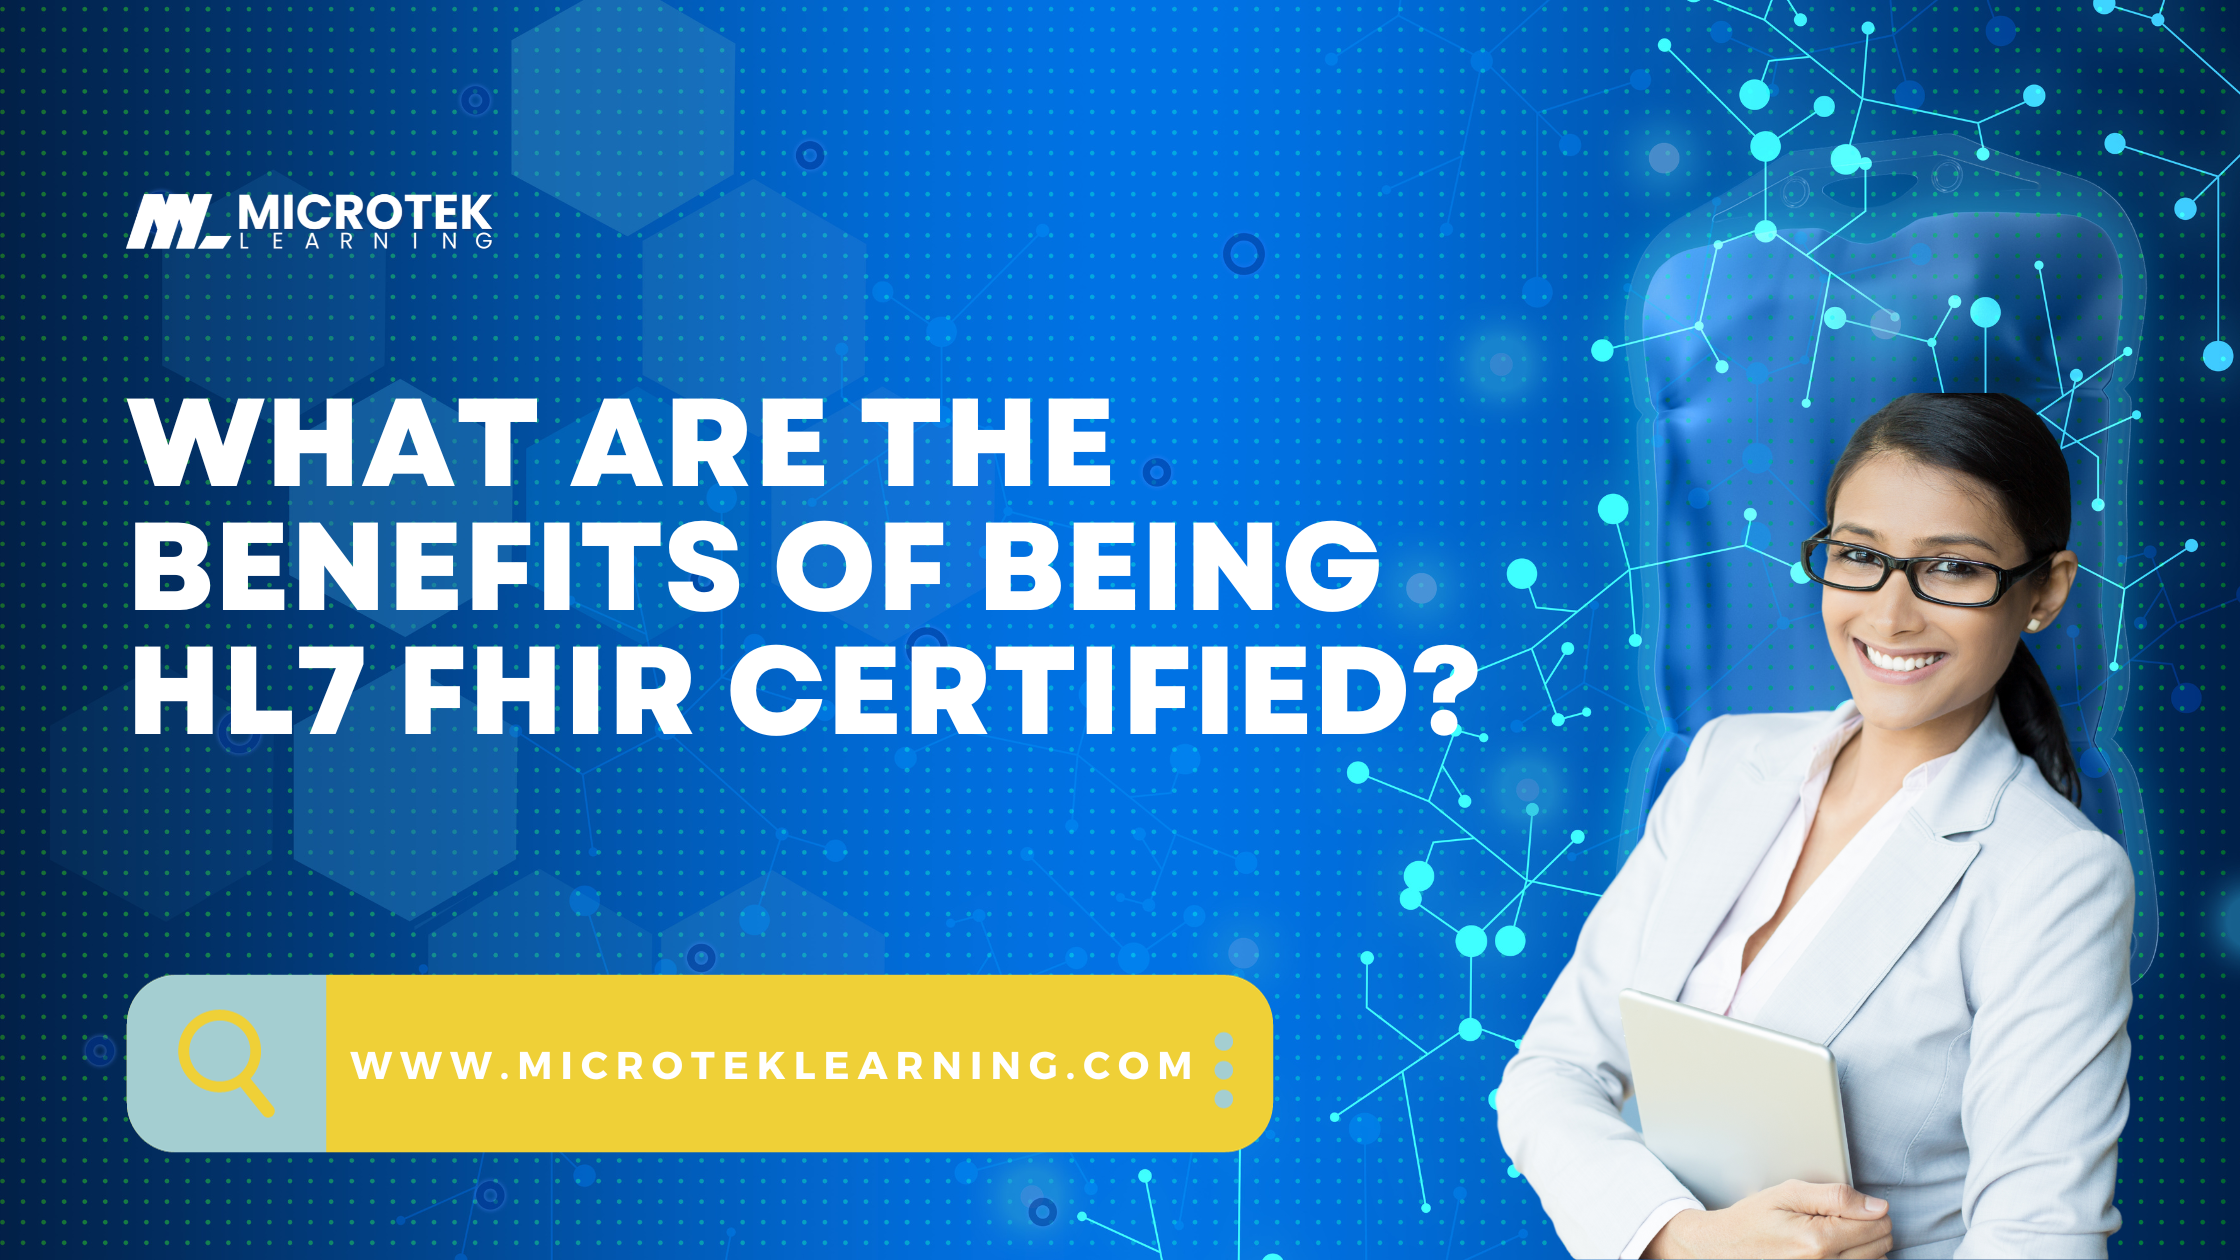 What are the benefits of being HL7 FHIR certified?